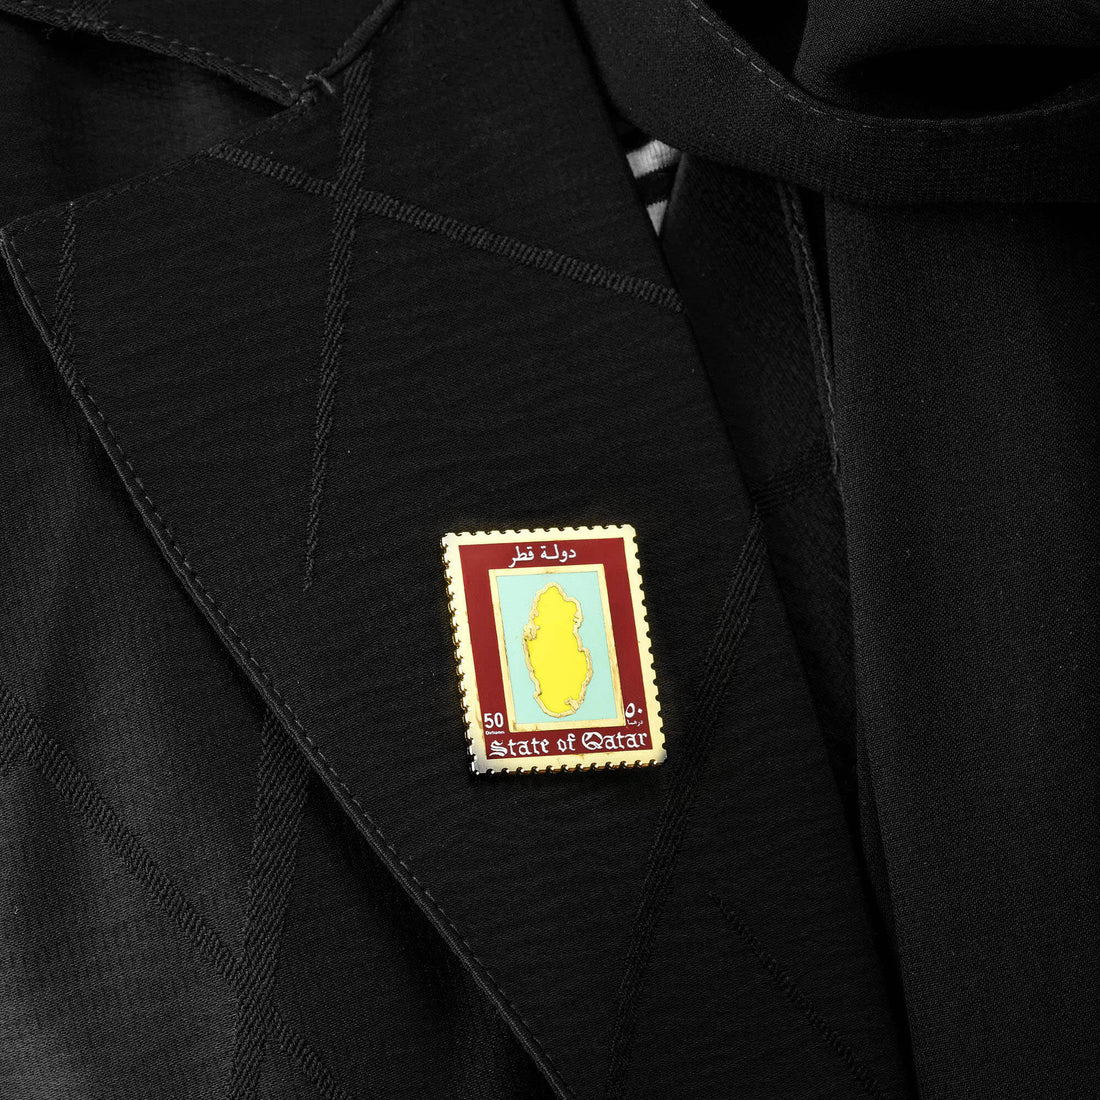 Pin: Qatar stamp (available as a pin or clothes magnet)